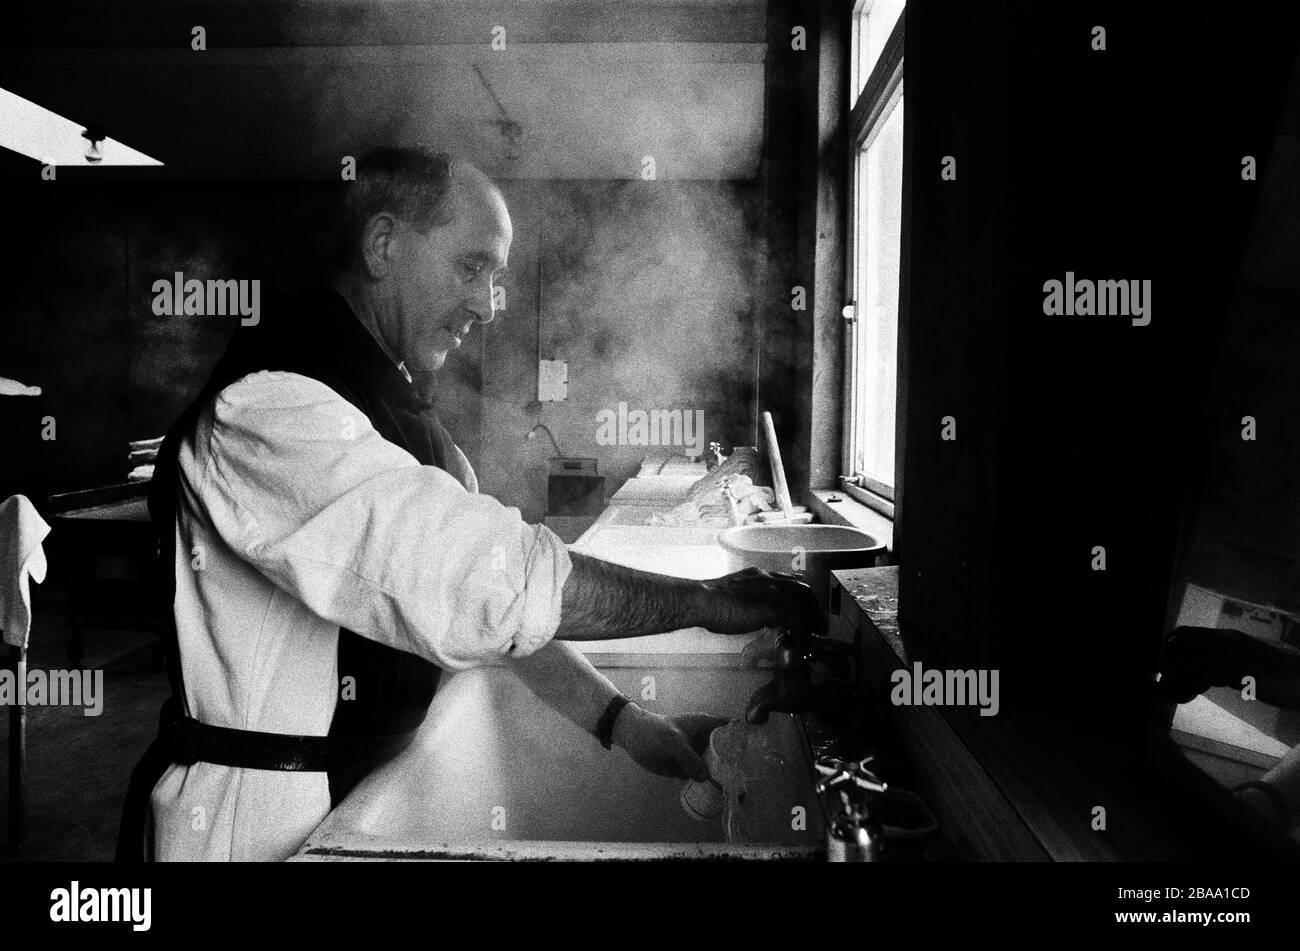 A monk working in the kitchen at Sancta Maria Abbey at Nunraw, East Lothian, home since 1946 to the Order of Cistercians of the Strict Observance. Around 15 monks were resident at Nunraw in 1996, undertaking a mixture of daily tasks and strict religious observance. The present purpose-built building dates from 1969 when the monks moved from the nearby Nunraw house. Stock Photo